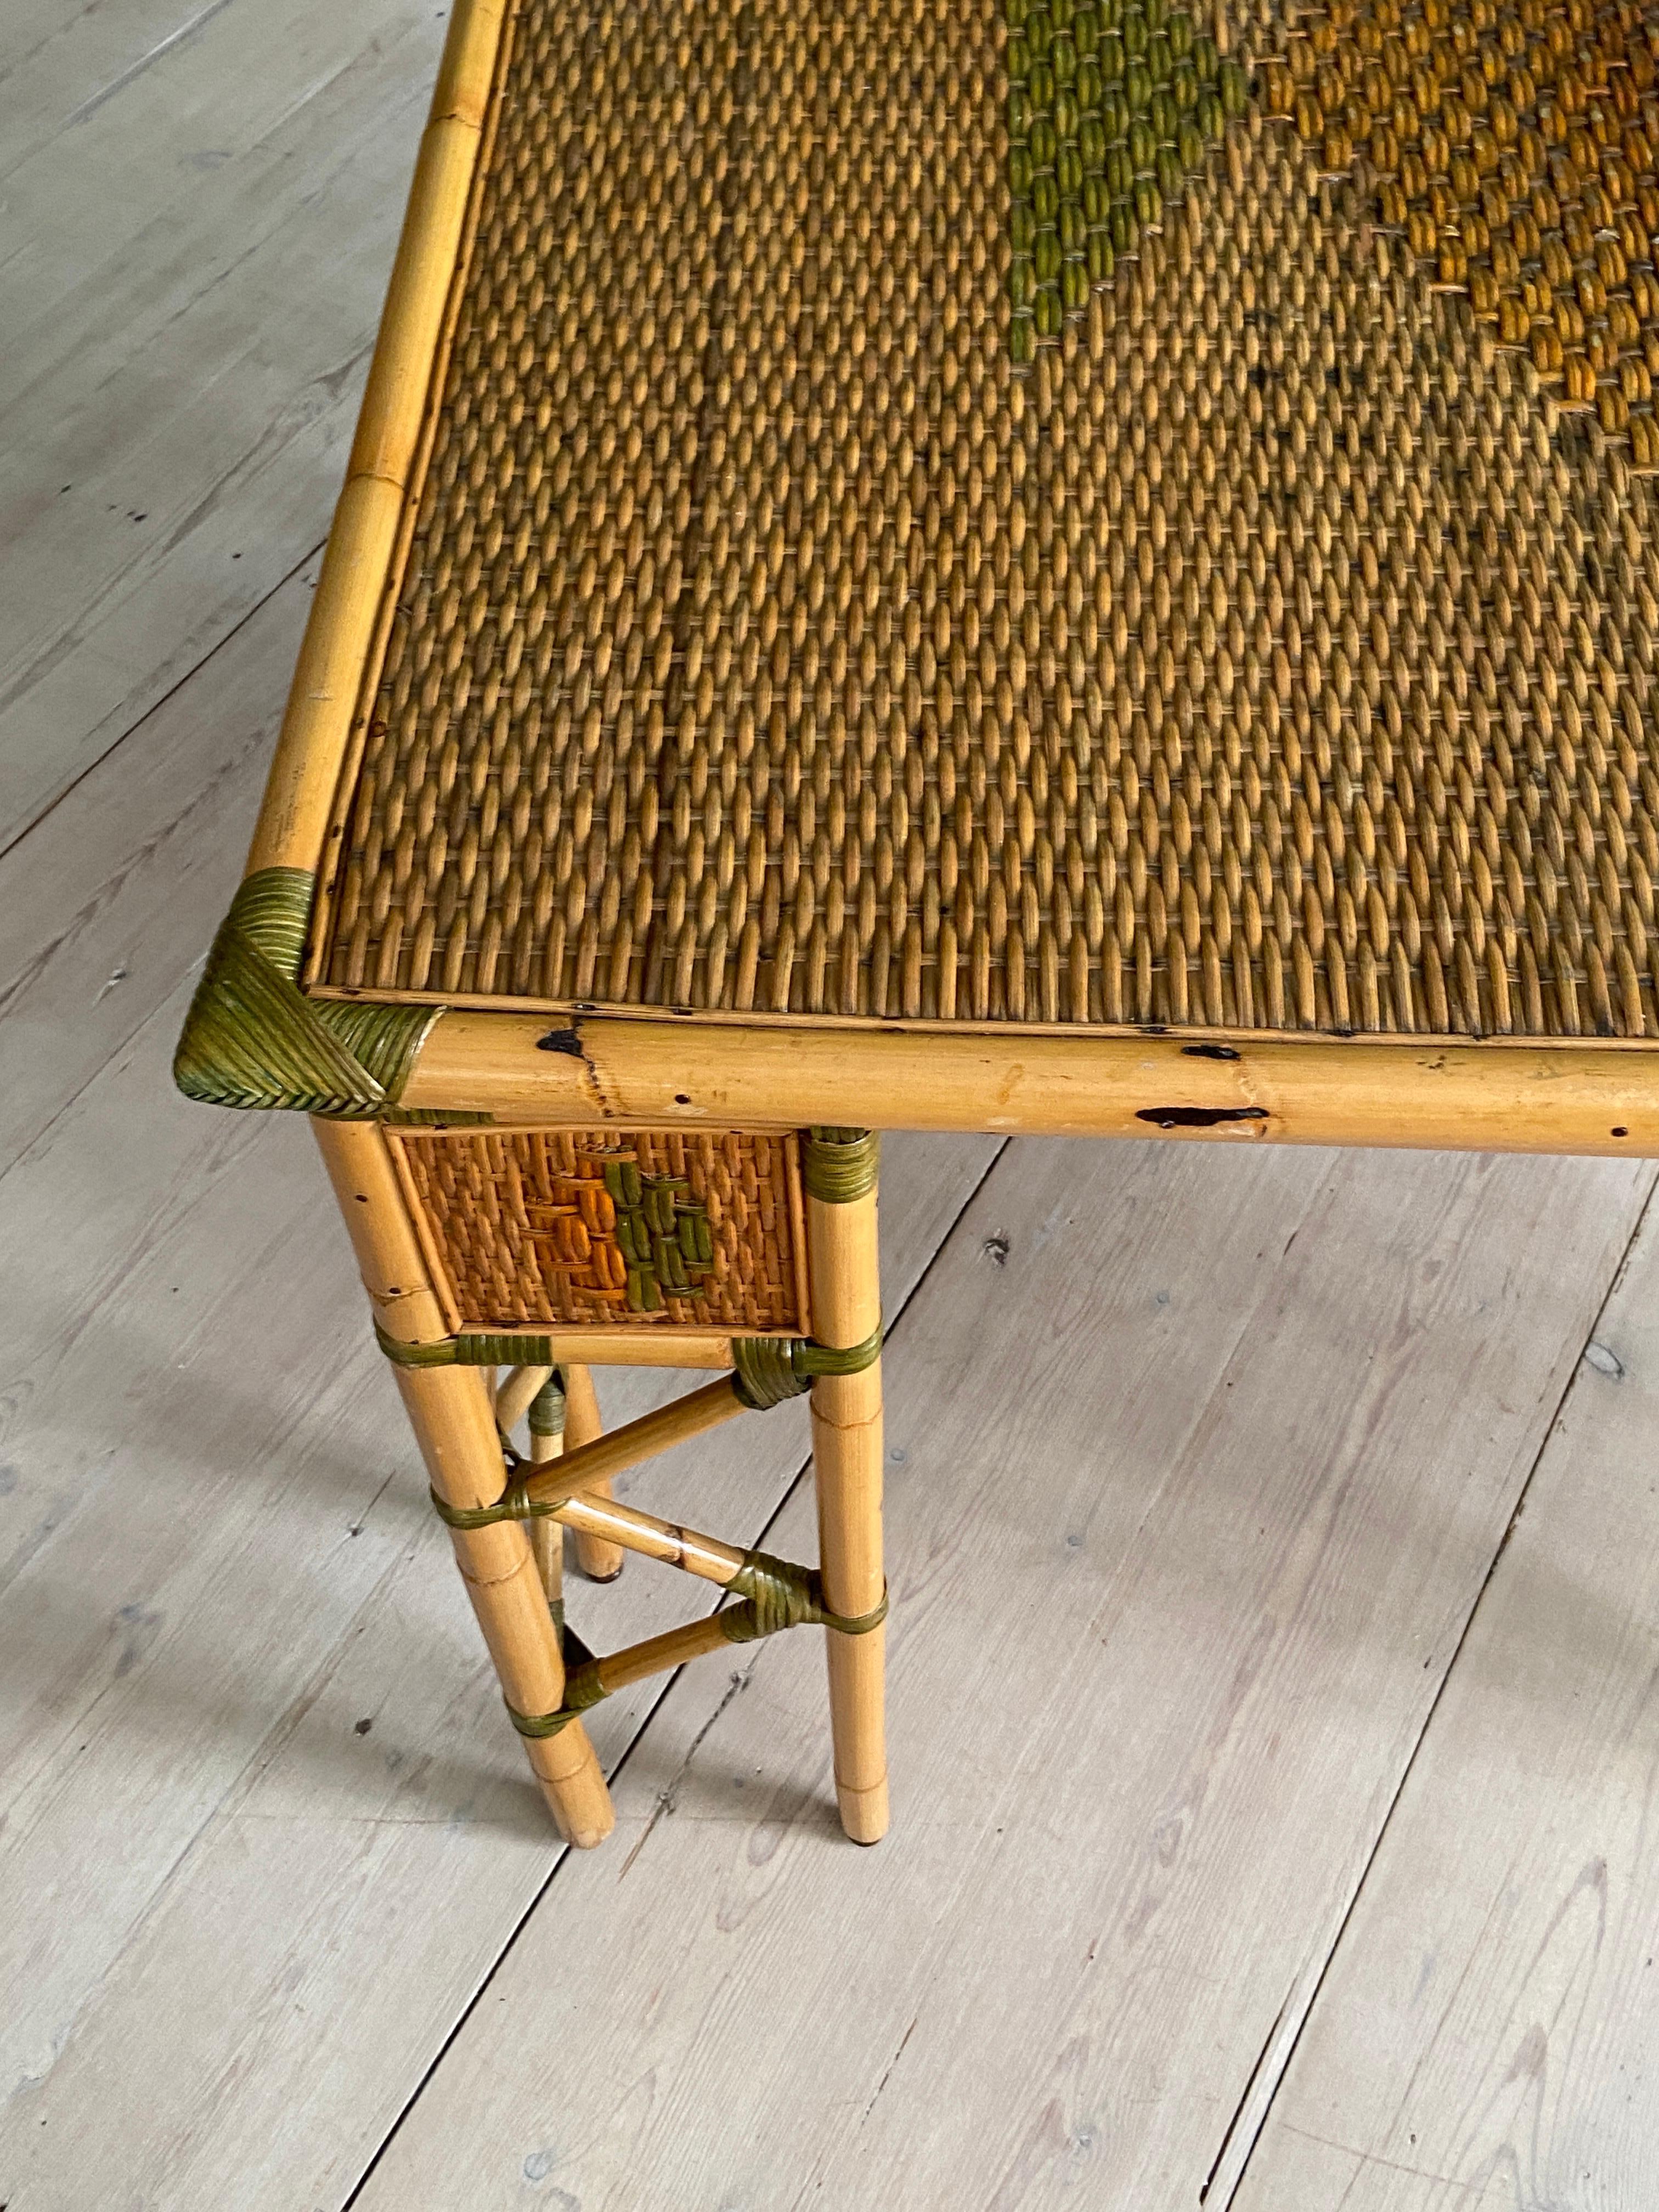 Vintage Woven Bamboo Table with Brass Details, France, Early 20th Century For Sale 3